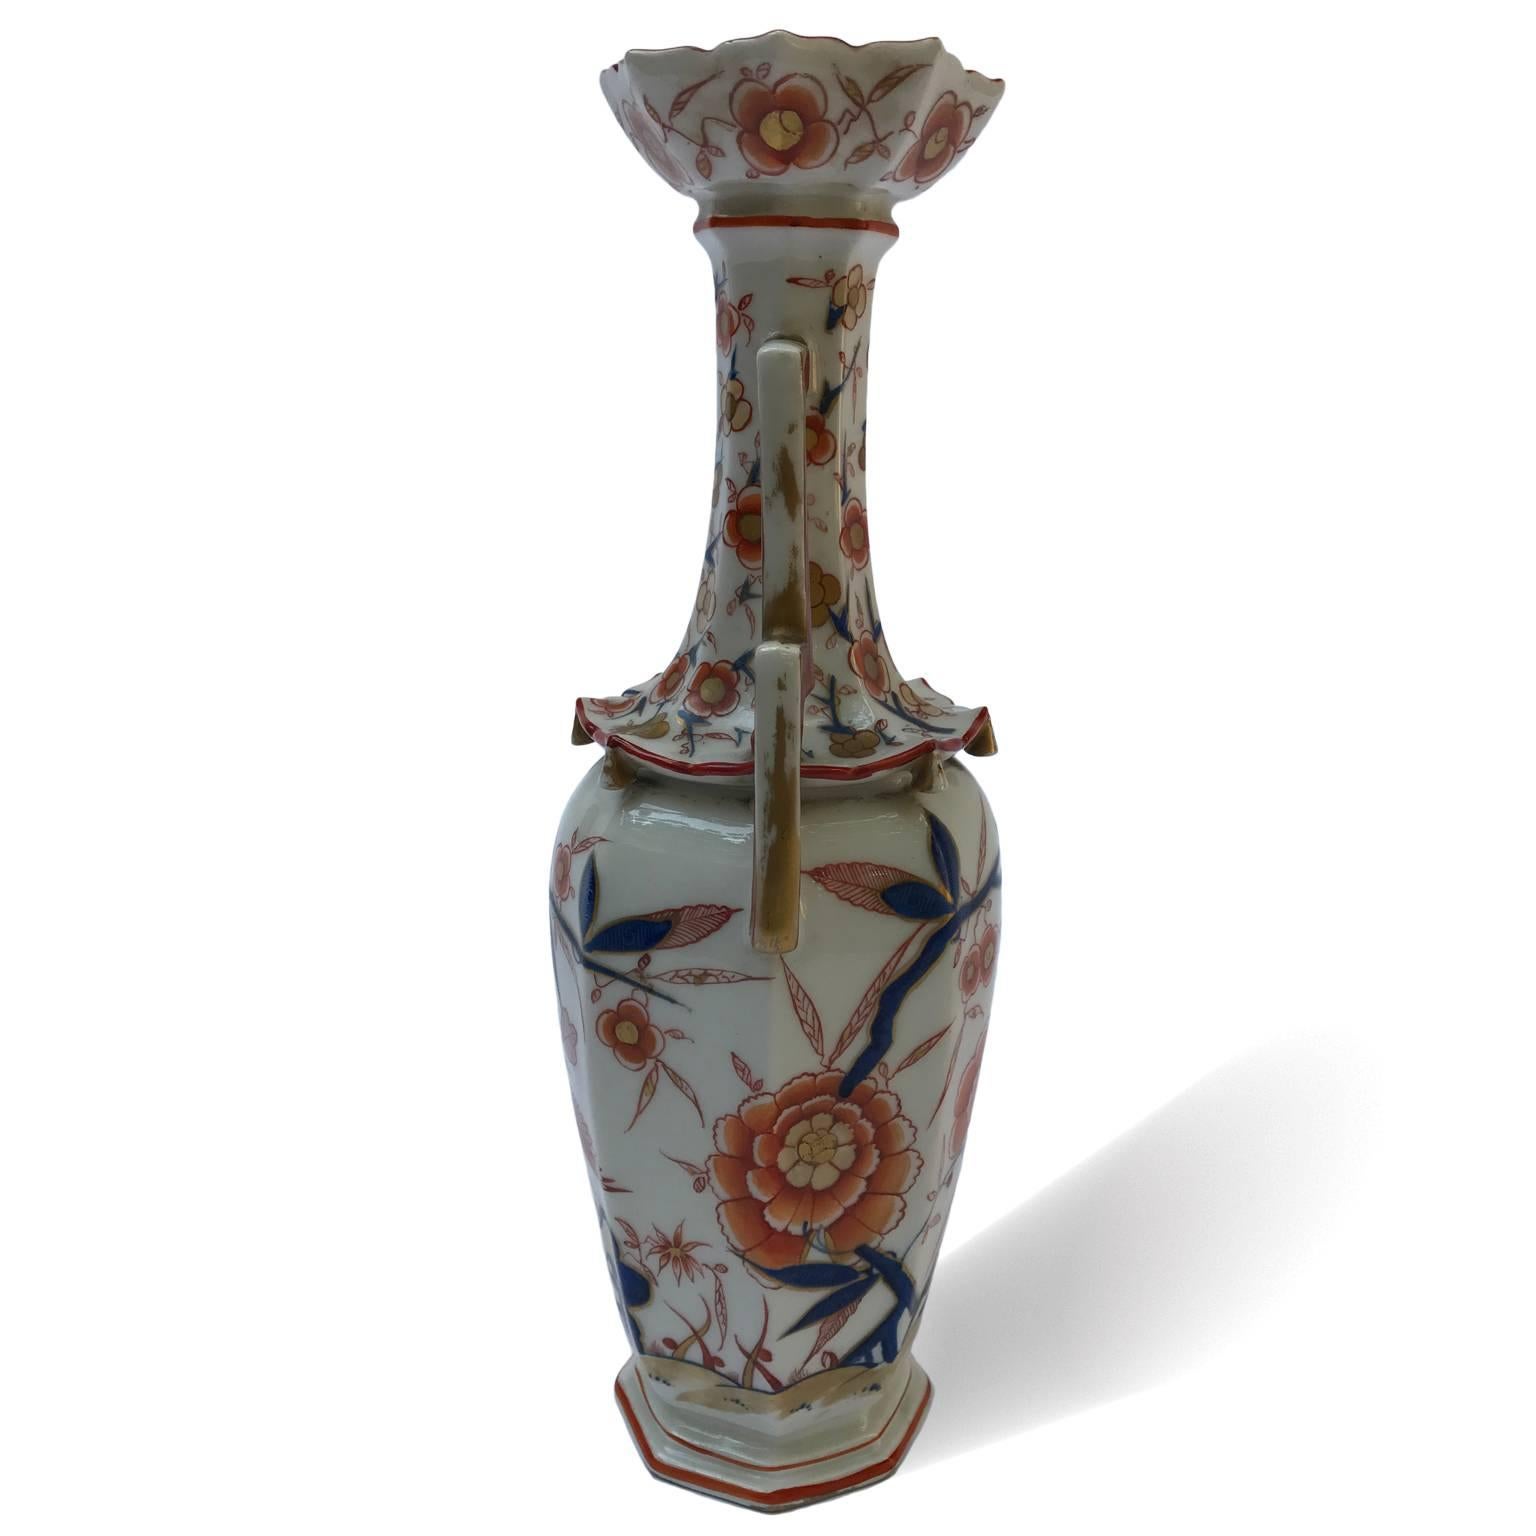 Pair of French Samson porcelain baluster vases, circa 1870. Two octagonal vases softly decorated by floral pattern, red peach flowers and small flowers in red, blue colors and gold on white ground. 
The main body is decorated throughout with